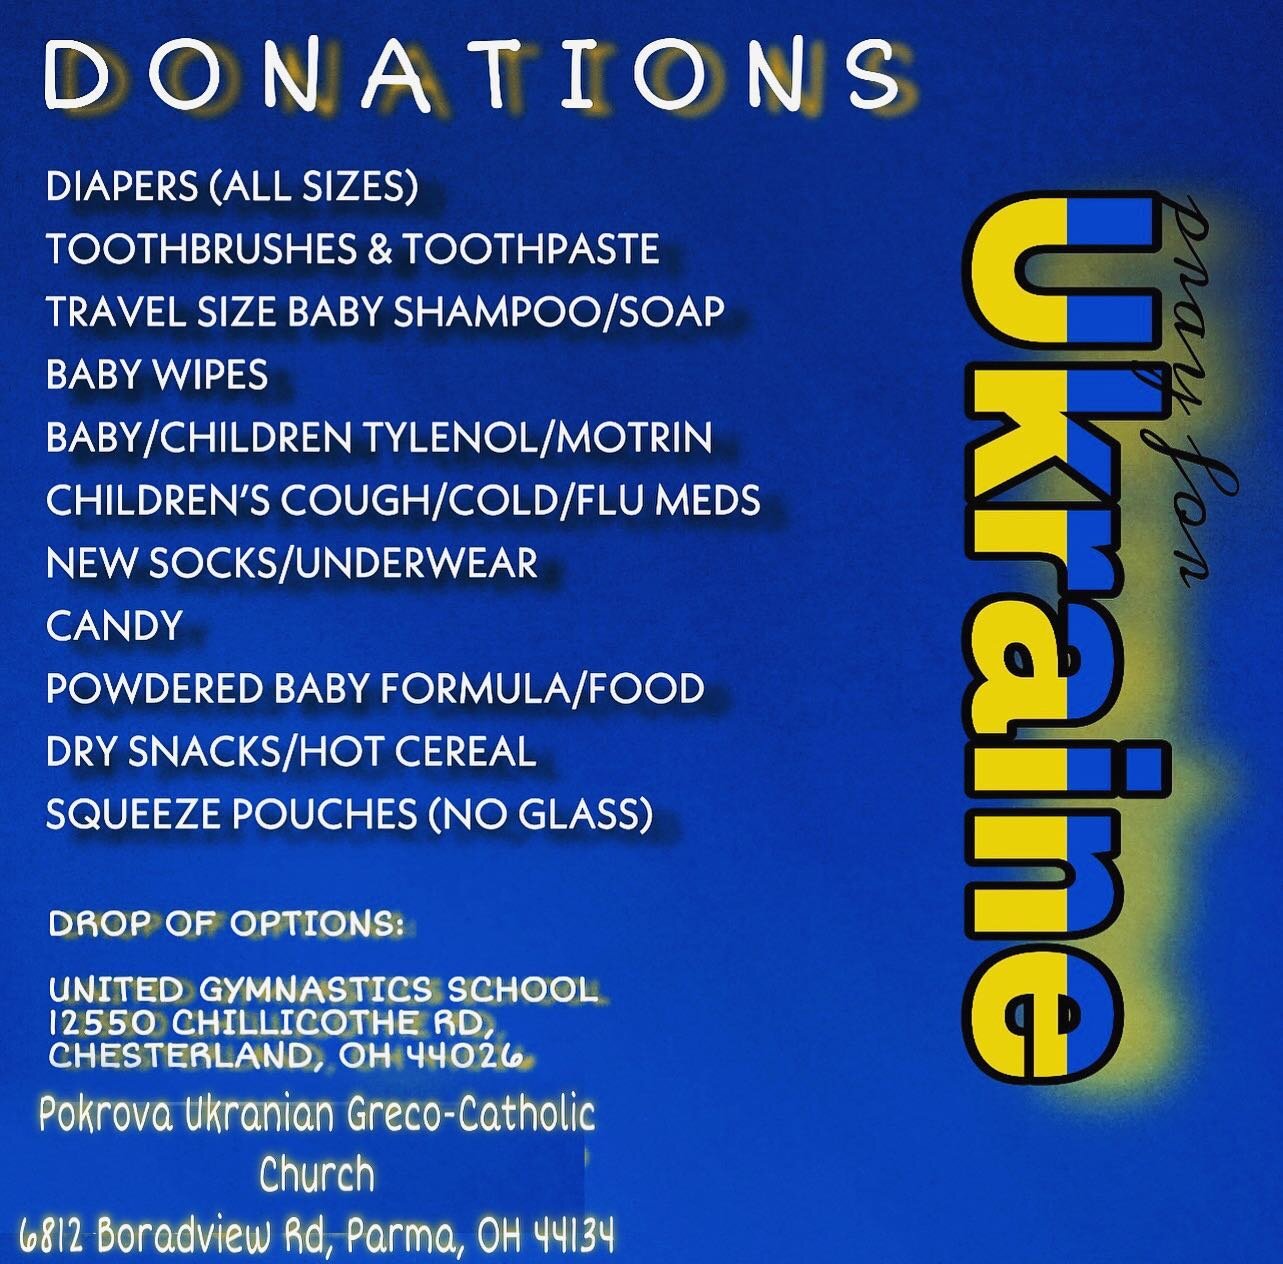 We are asking for your help, to help those who have been affected by the war in Ukrainian, especially the children who need these supplies. Please consider donating the following items. You can drop it off to us at United Gymnastics, or directly to P